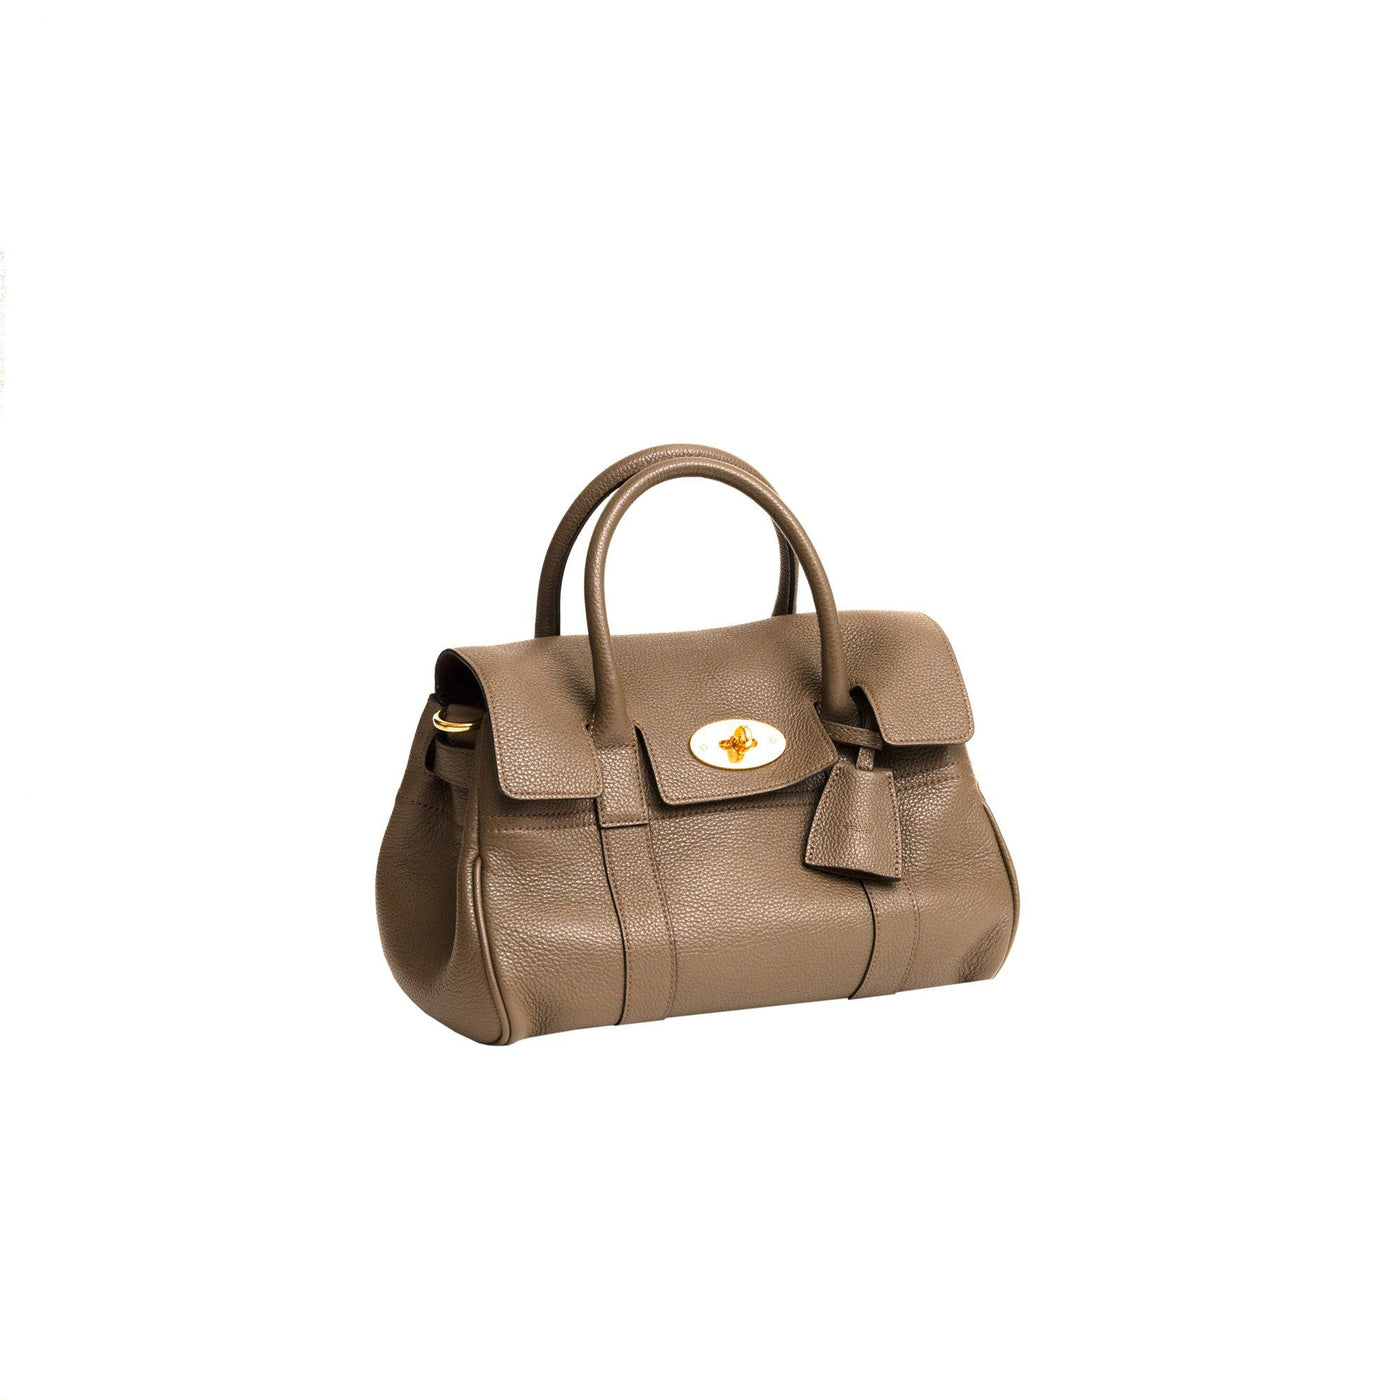 Mulberry Soft Bayswater Tan Brown Bag- Small